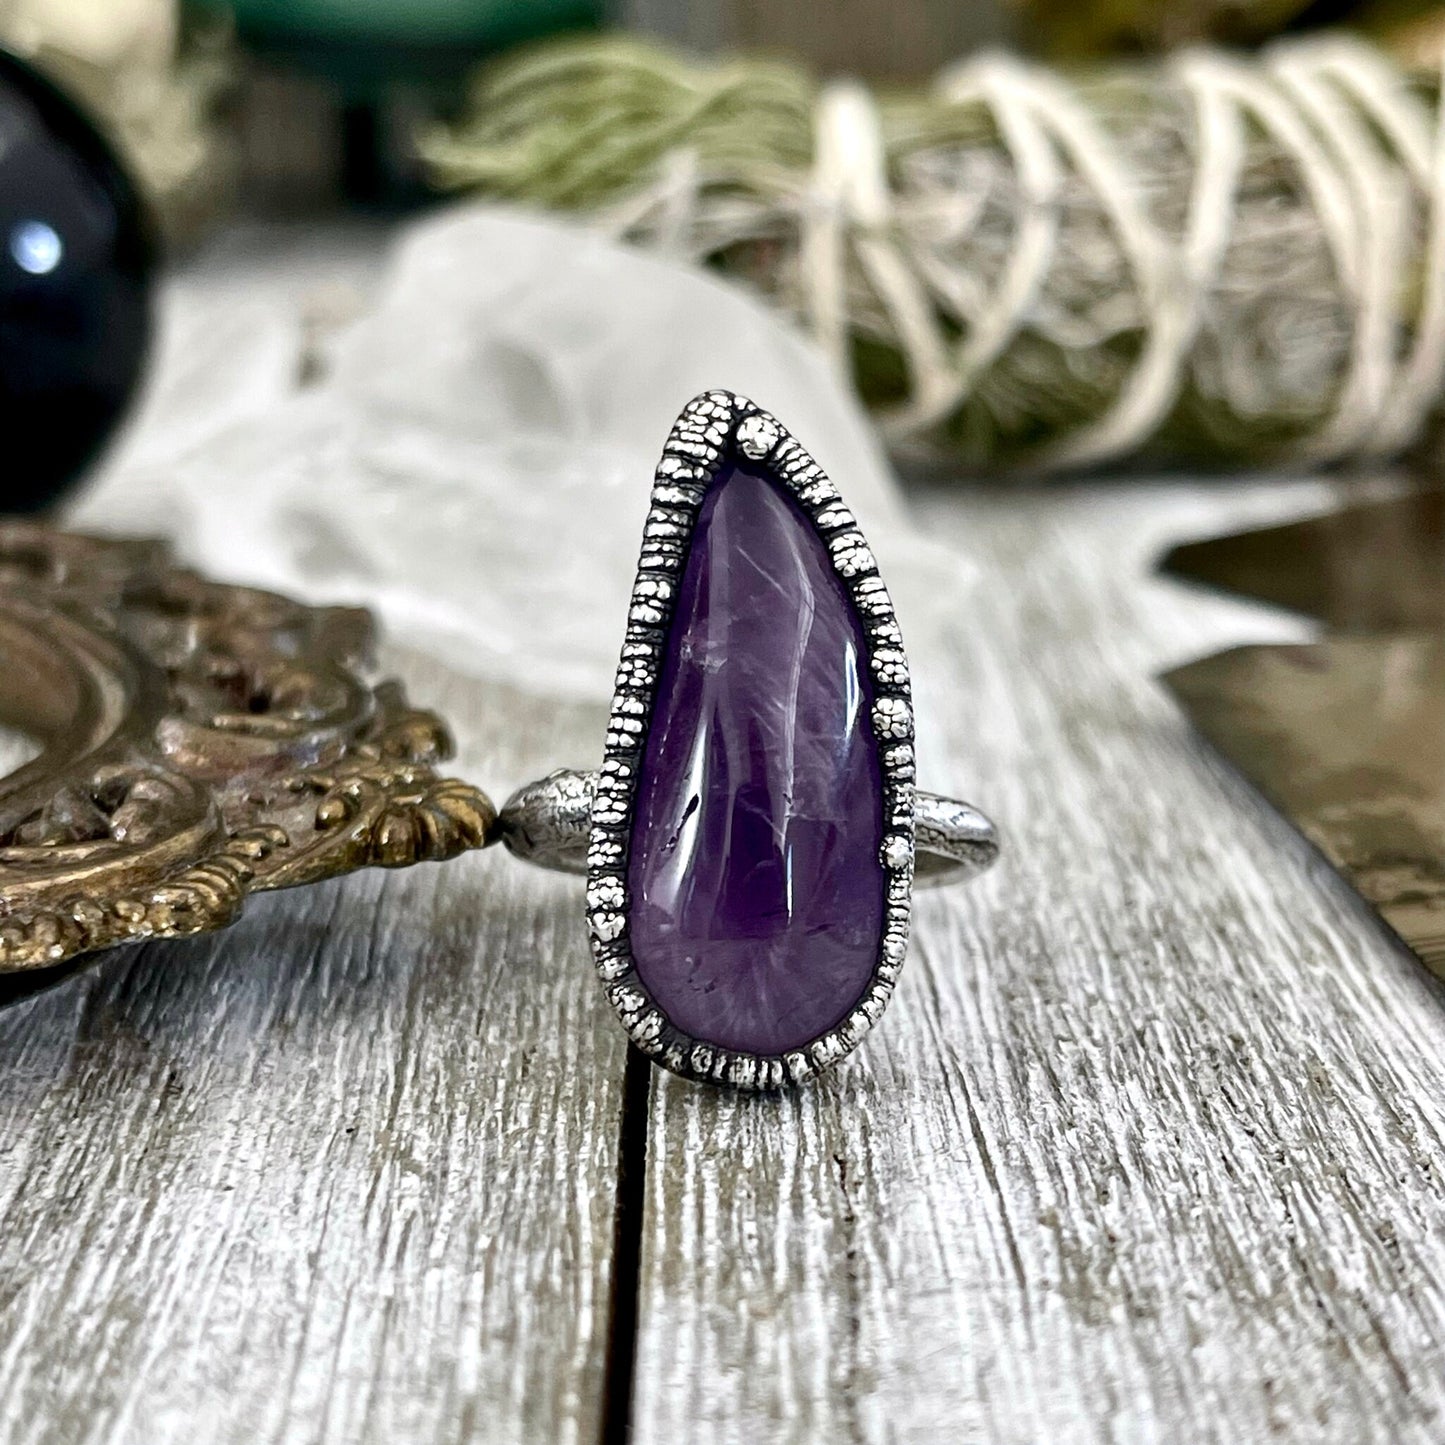 Size 8 Purple Amethyst Gemstone Crystal Ring Set in Fine Silver / Foxlark Collection - One of a Kind / Gothic Jewelry